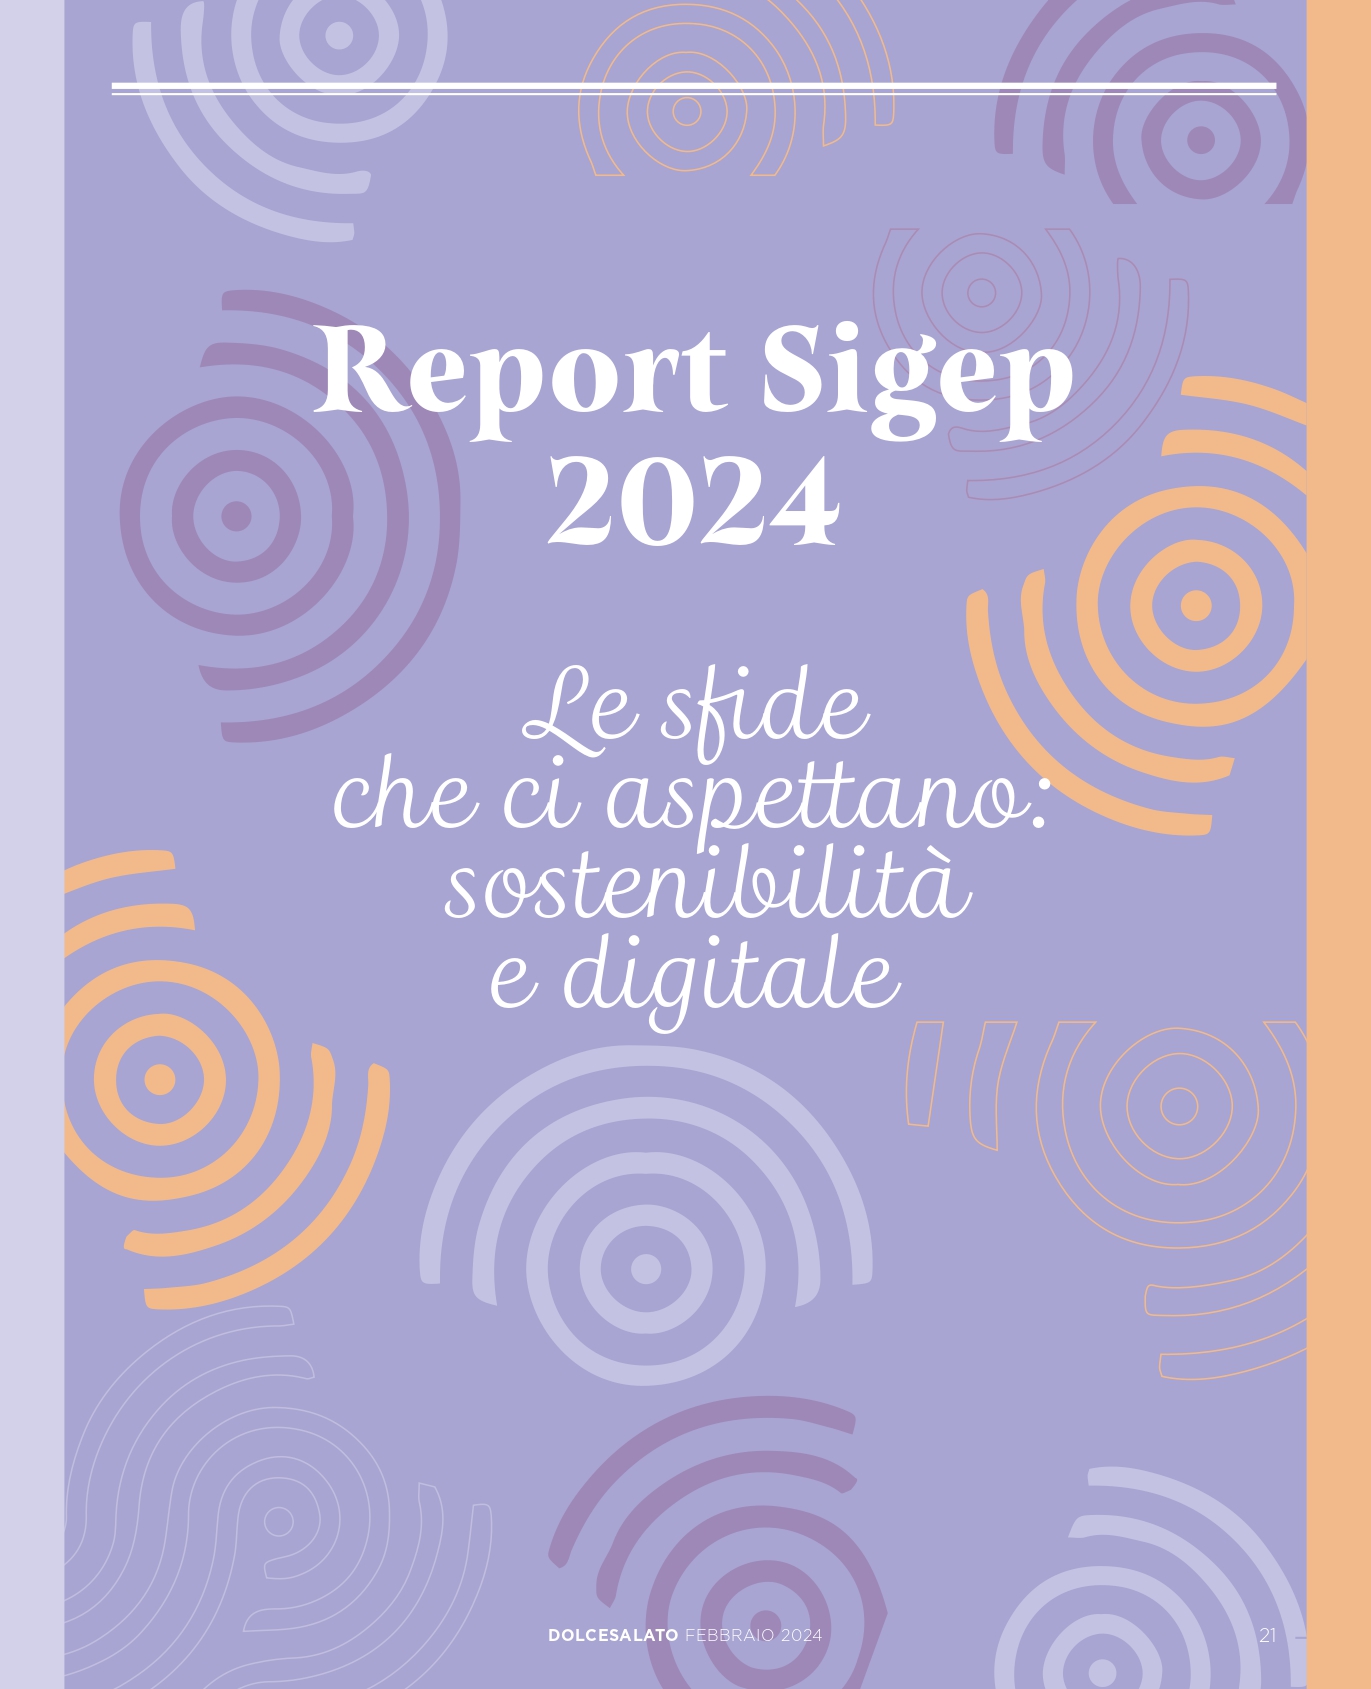 Report Sigep